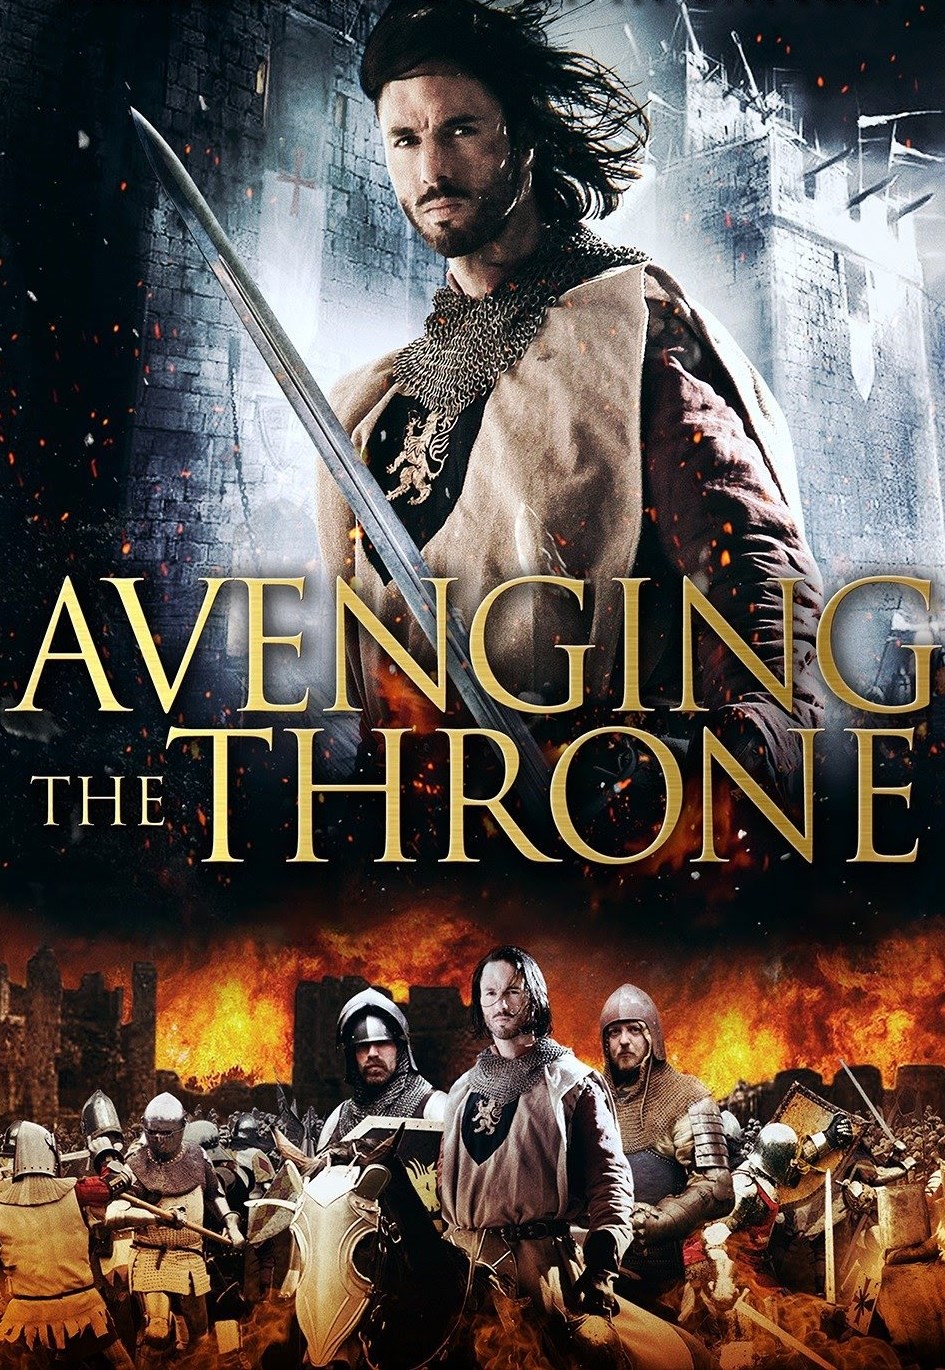 Avenging The Throne [HD] (2013)